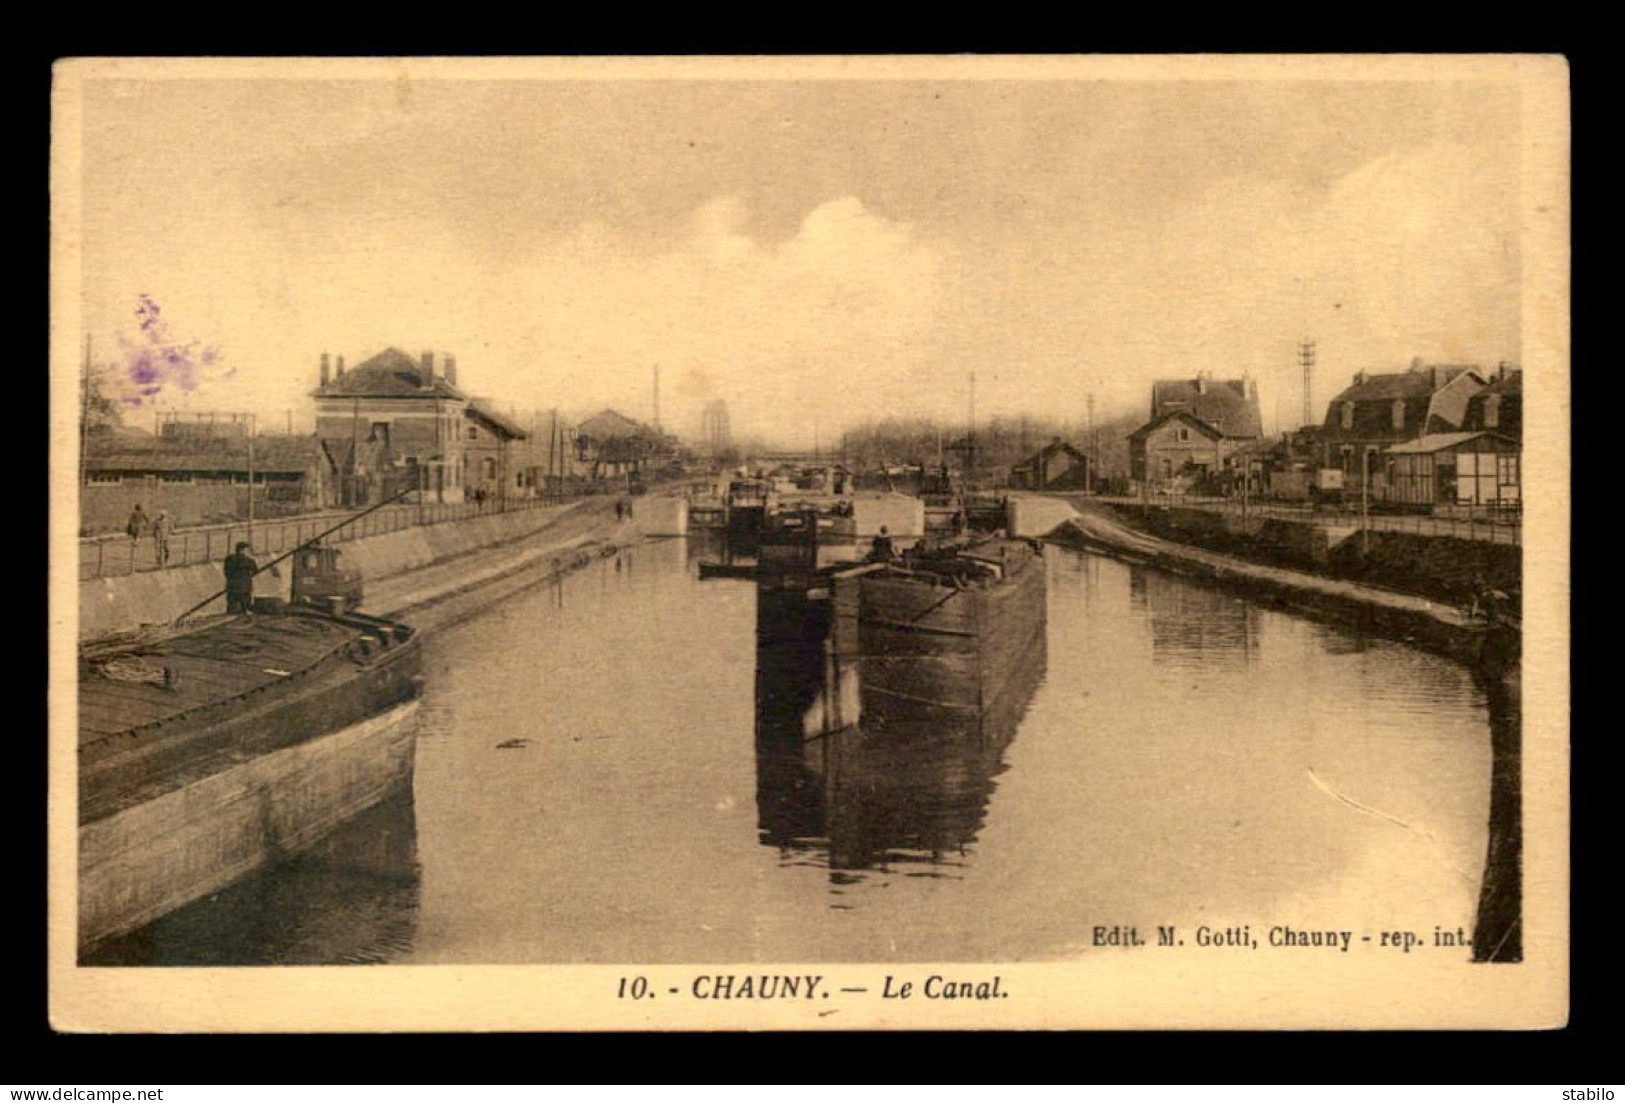 02 - CHAUNY - LE CANAL - PENICHES - TROLLET ELECTRIQUE - Chauny